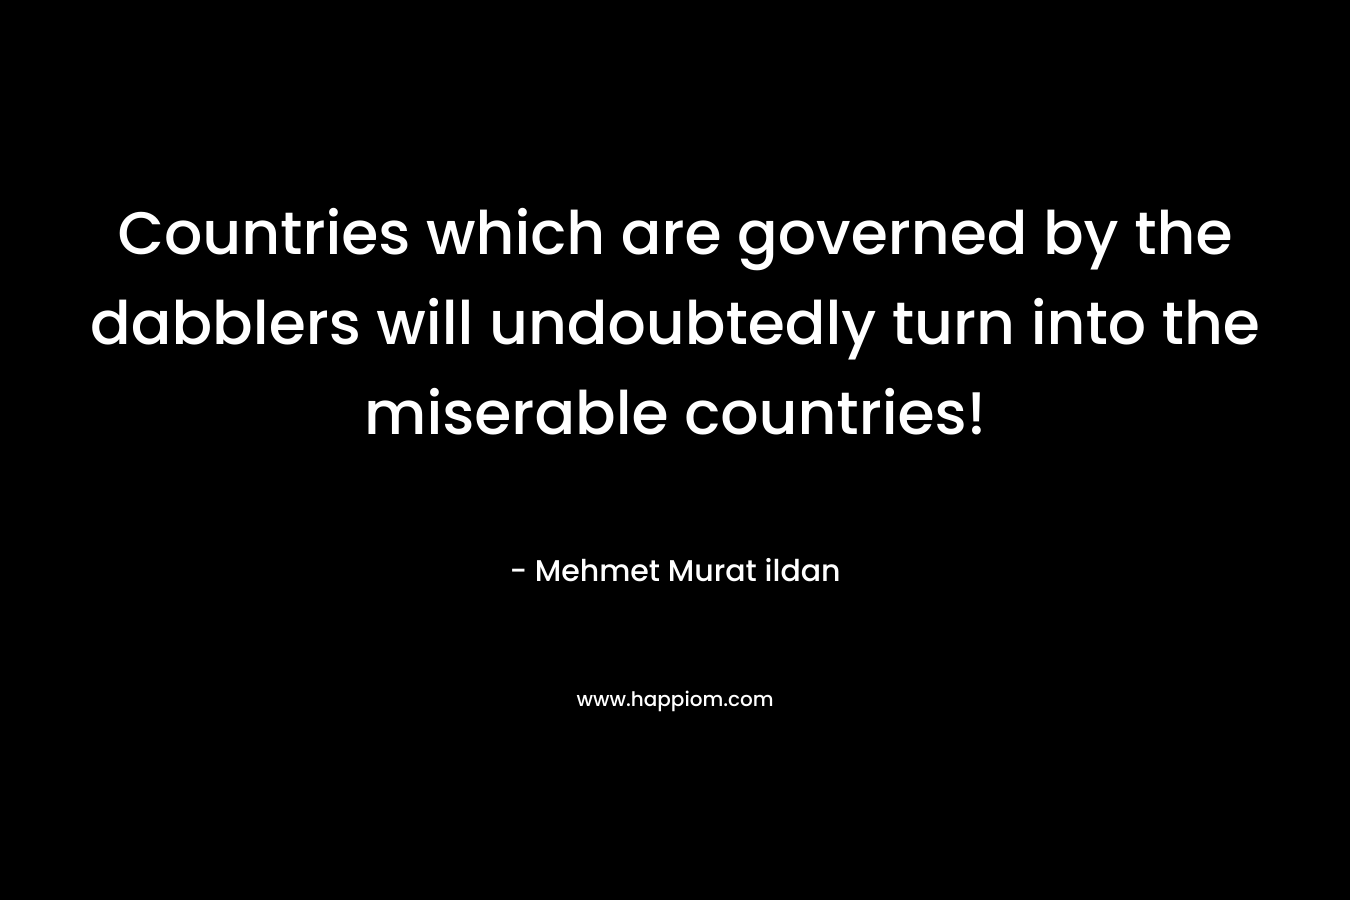 Countries which are governed by the dabblers will undoubtedly turn into the miserable countries!